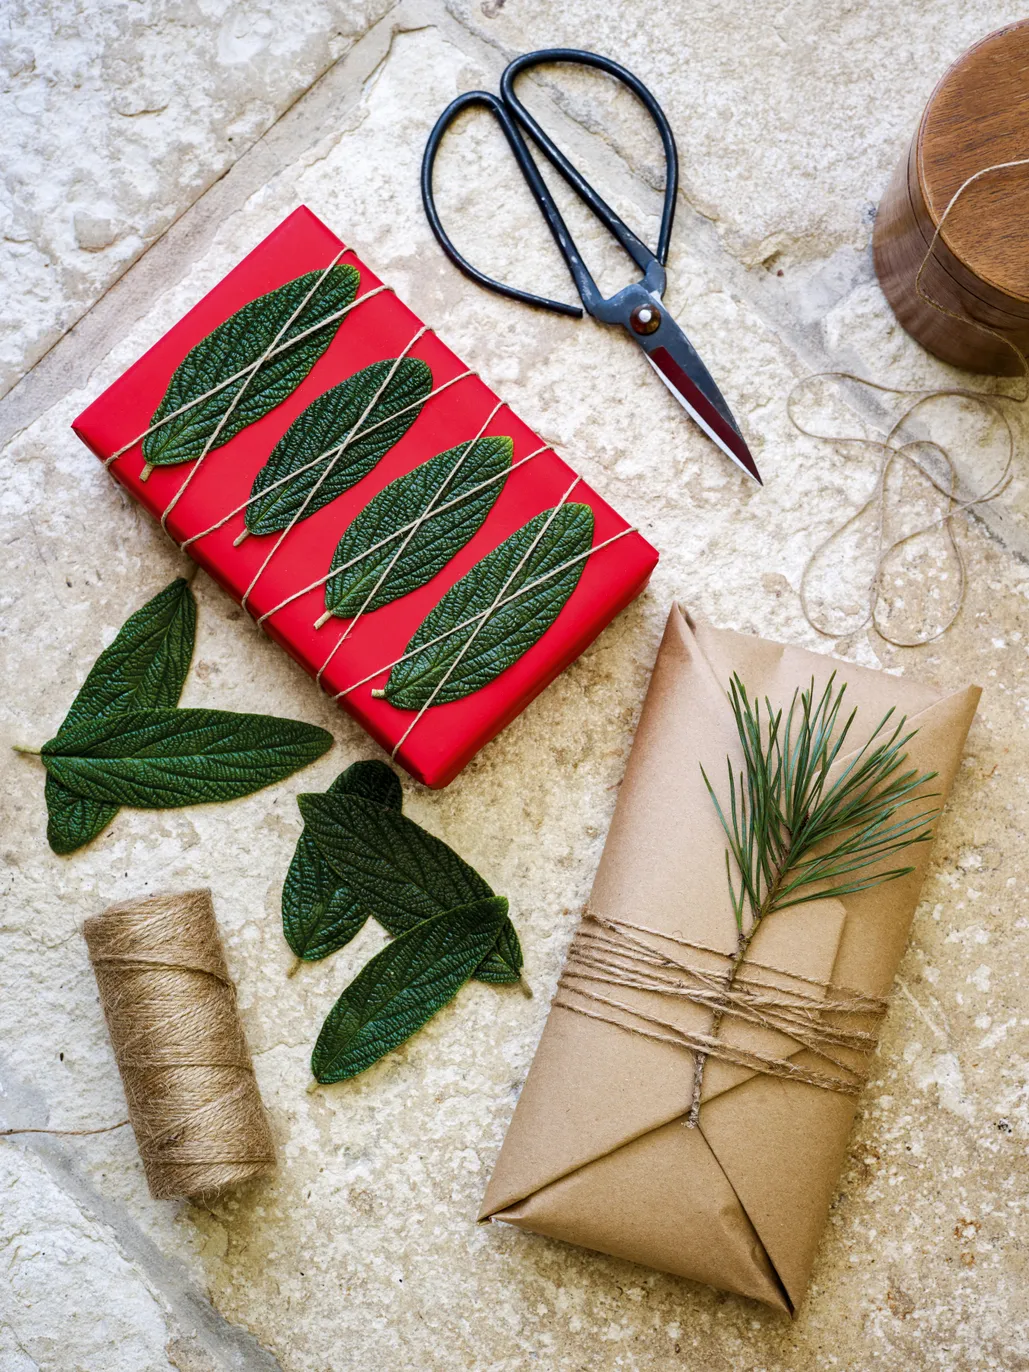 Gift wrapping Christmas presents with natural materials - Gardens